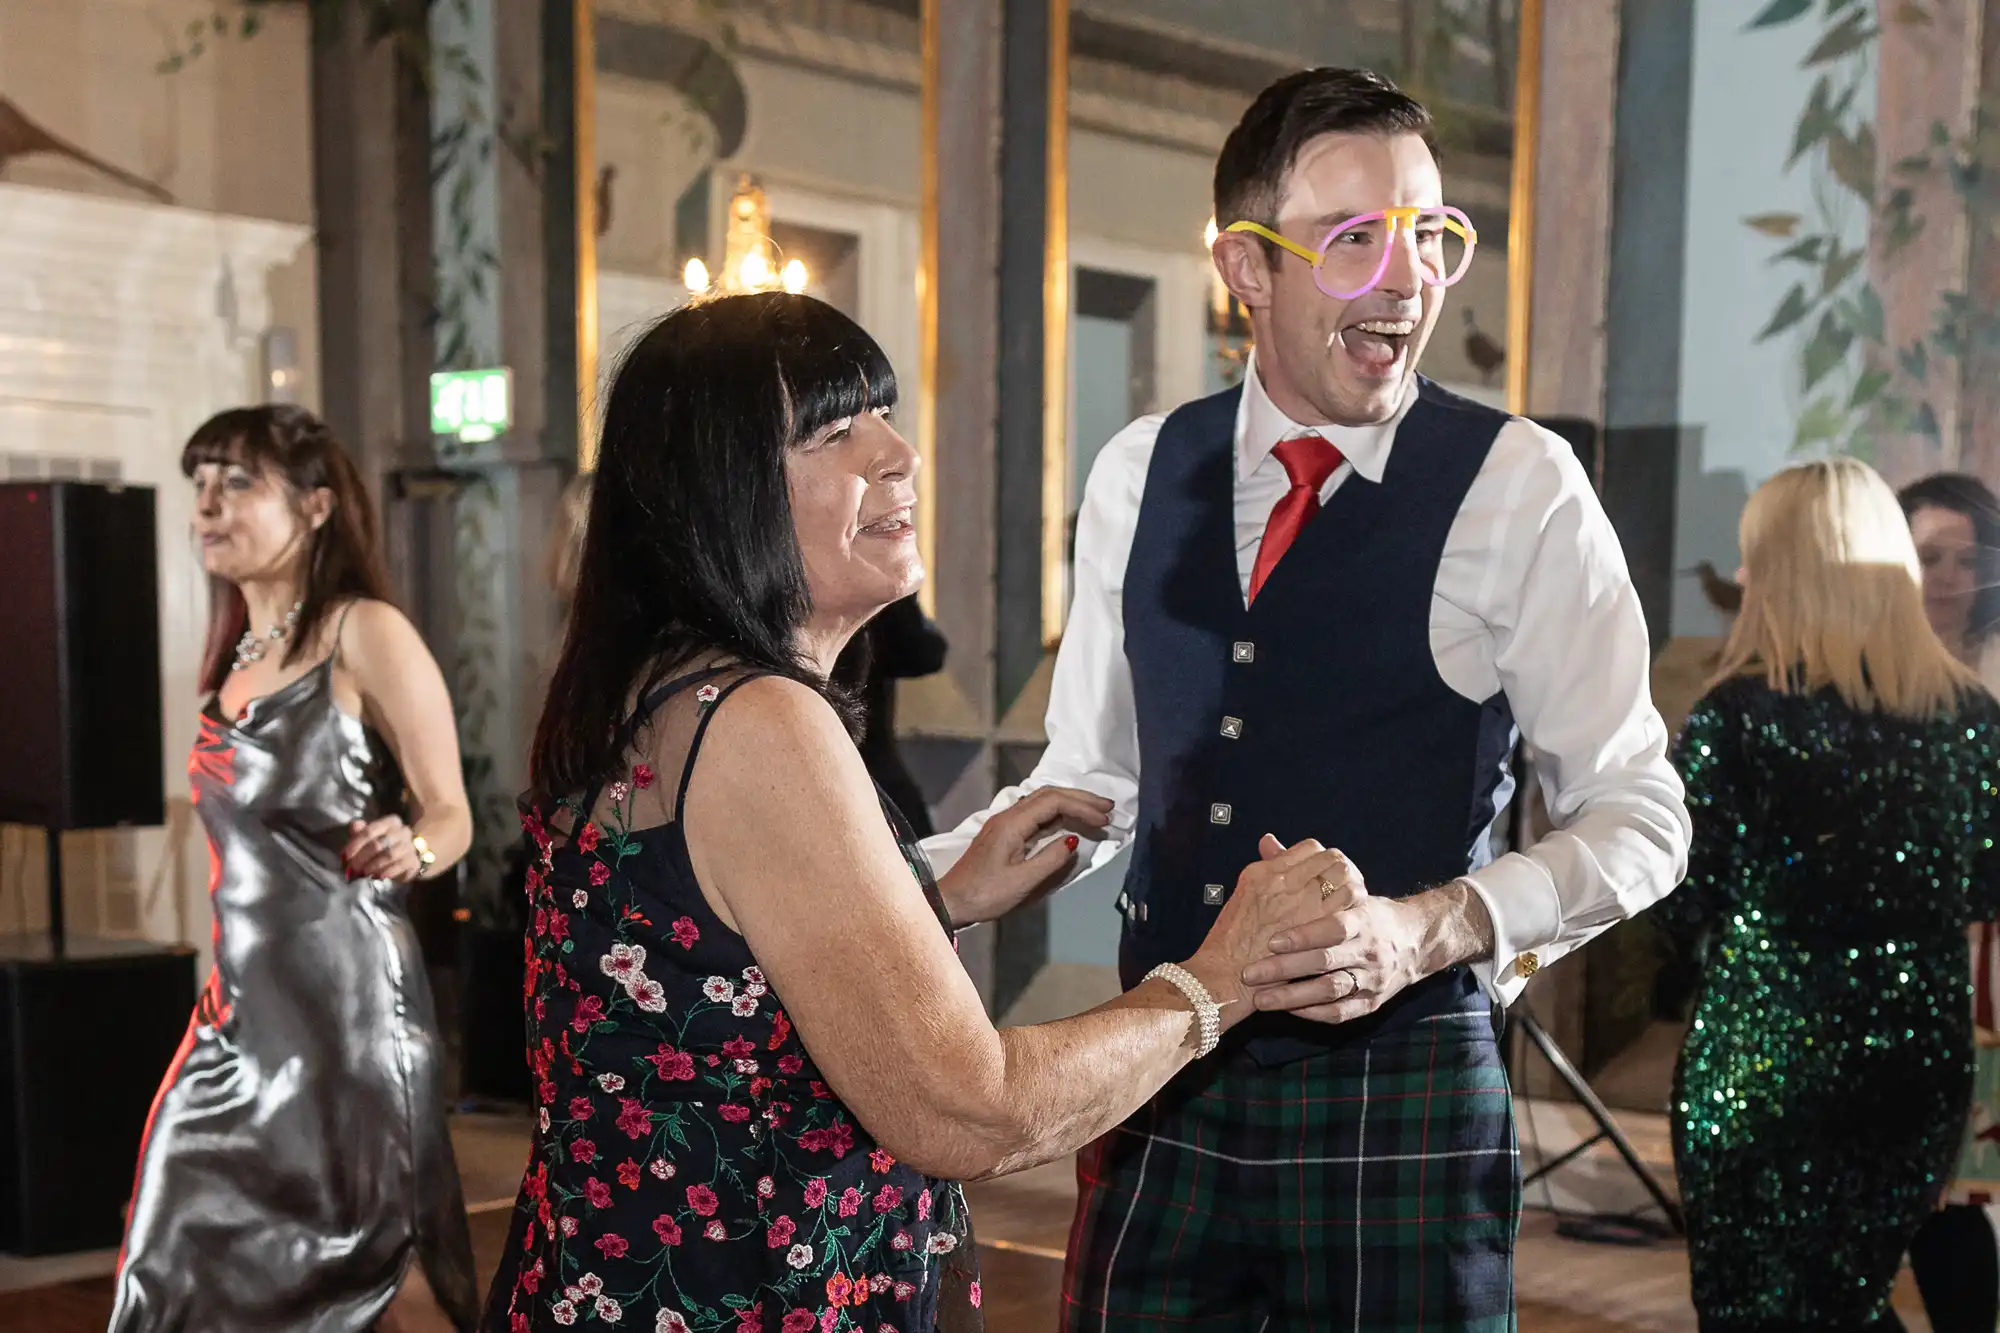 A man in a kilt and light-up glasses dances with a woman in a floral dress at an indoor event. Other people are dancing in the background.